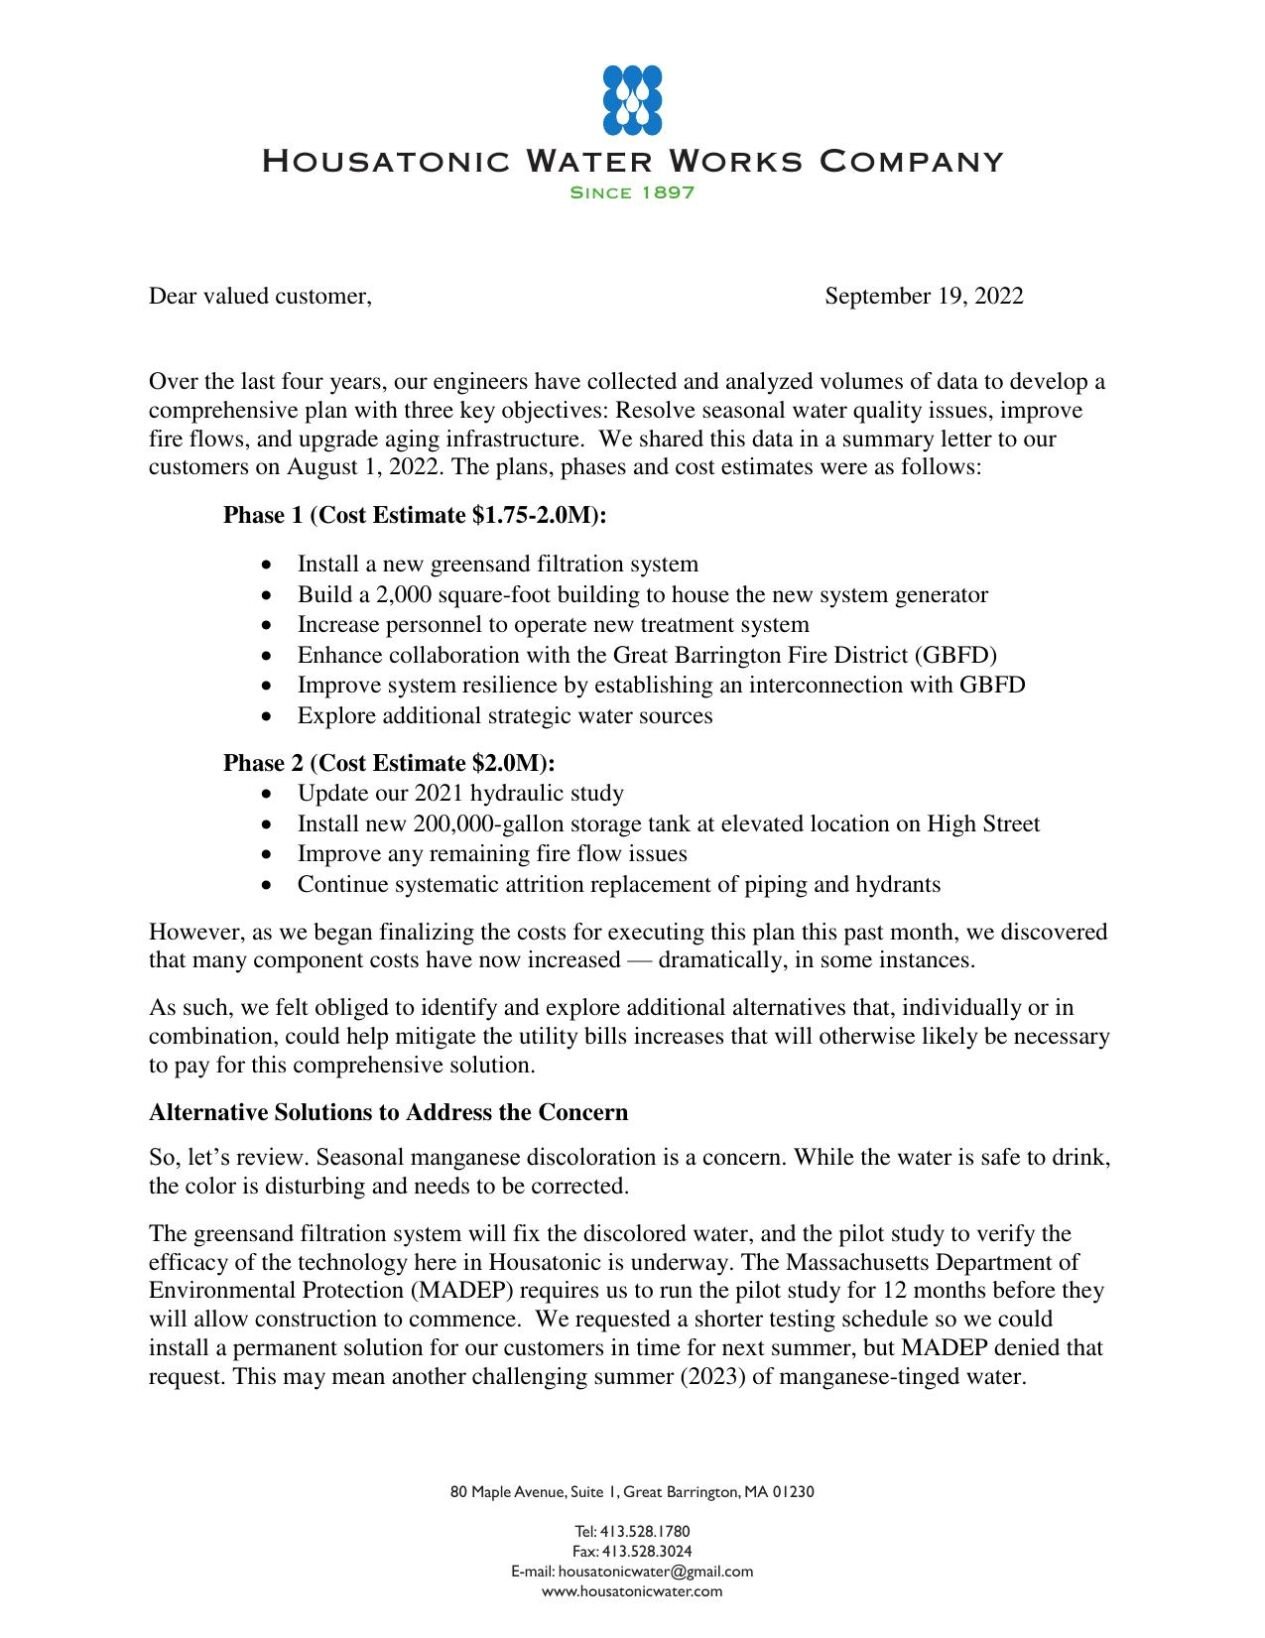 Housatonic Water Works Co. letter